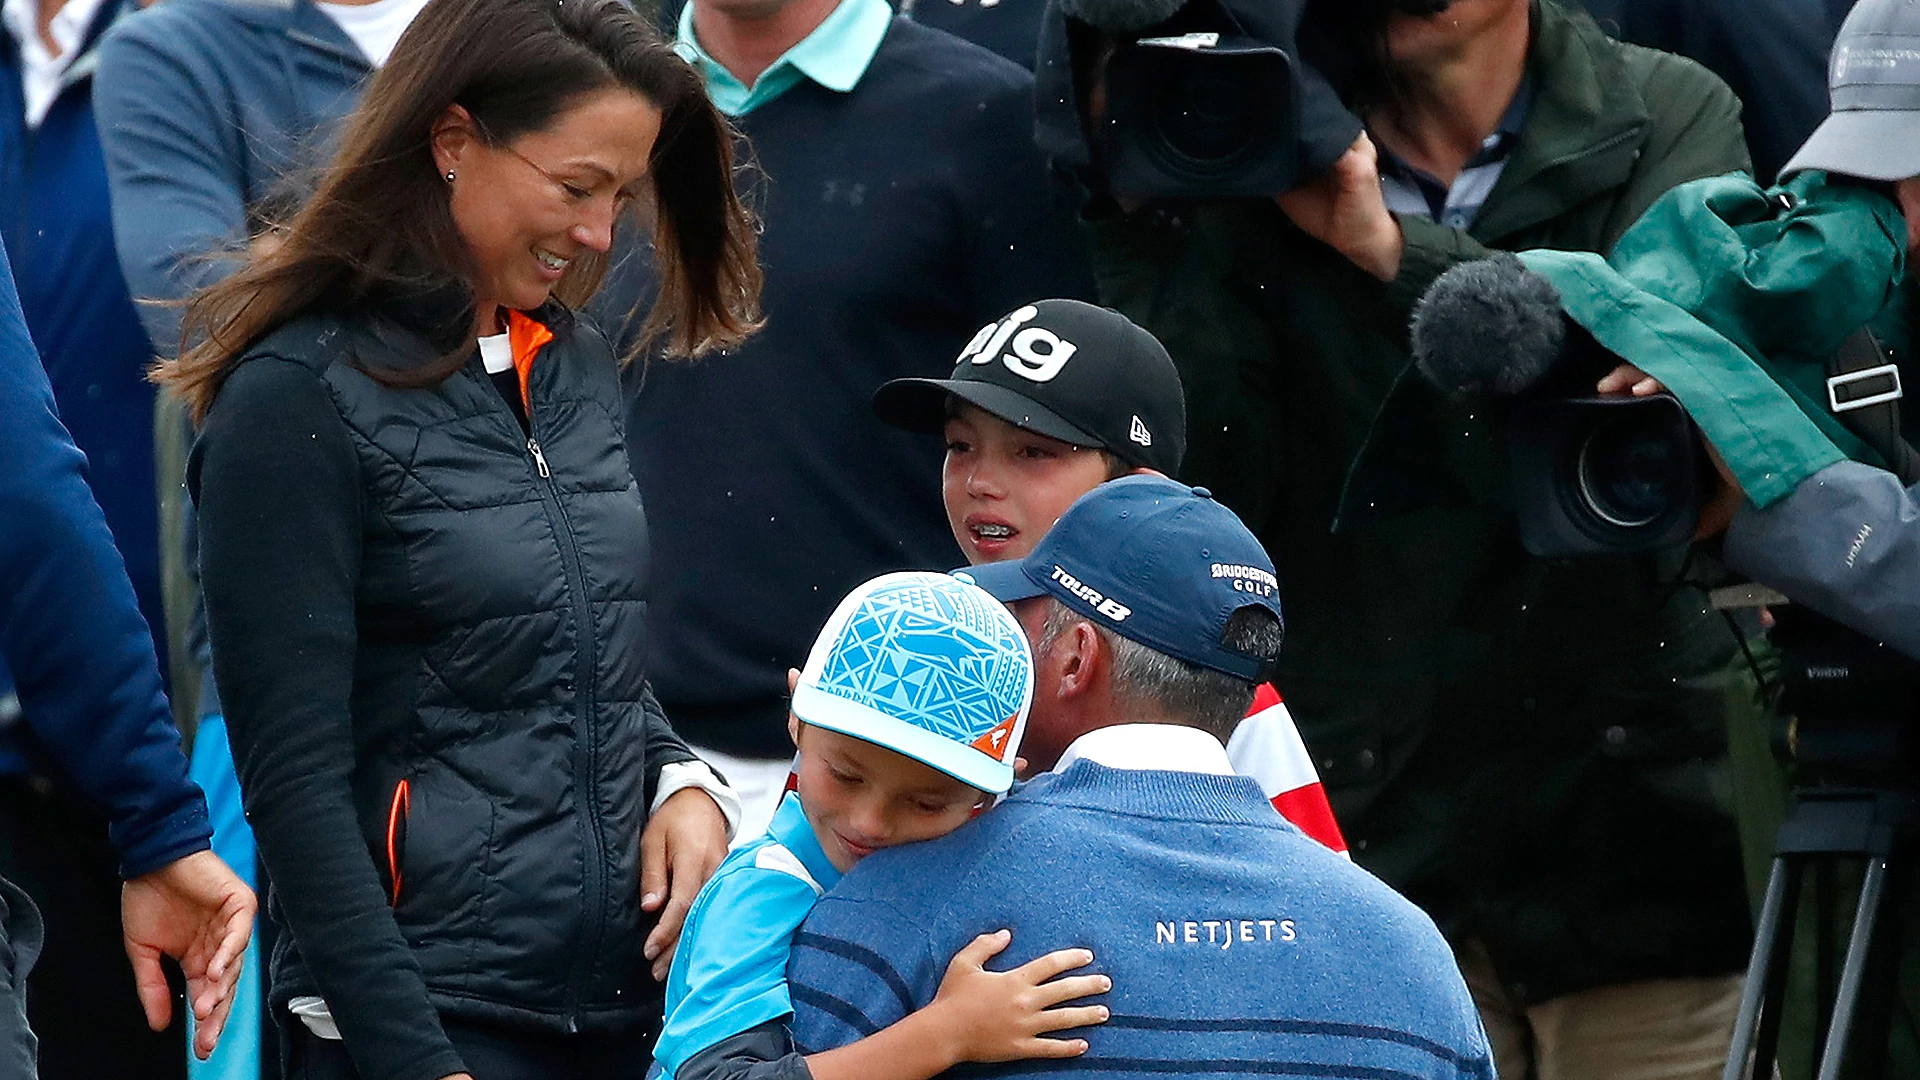 Kuchar gets 'teary surprise' from family on 18th green